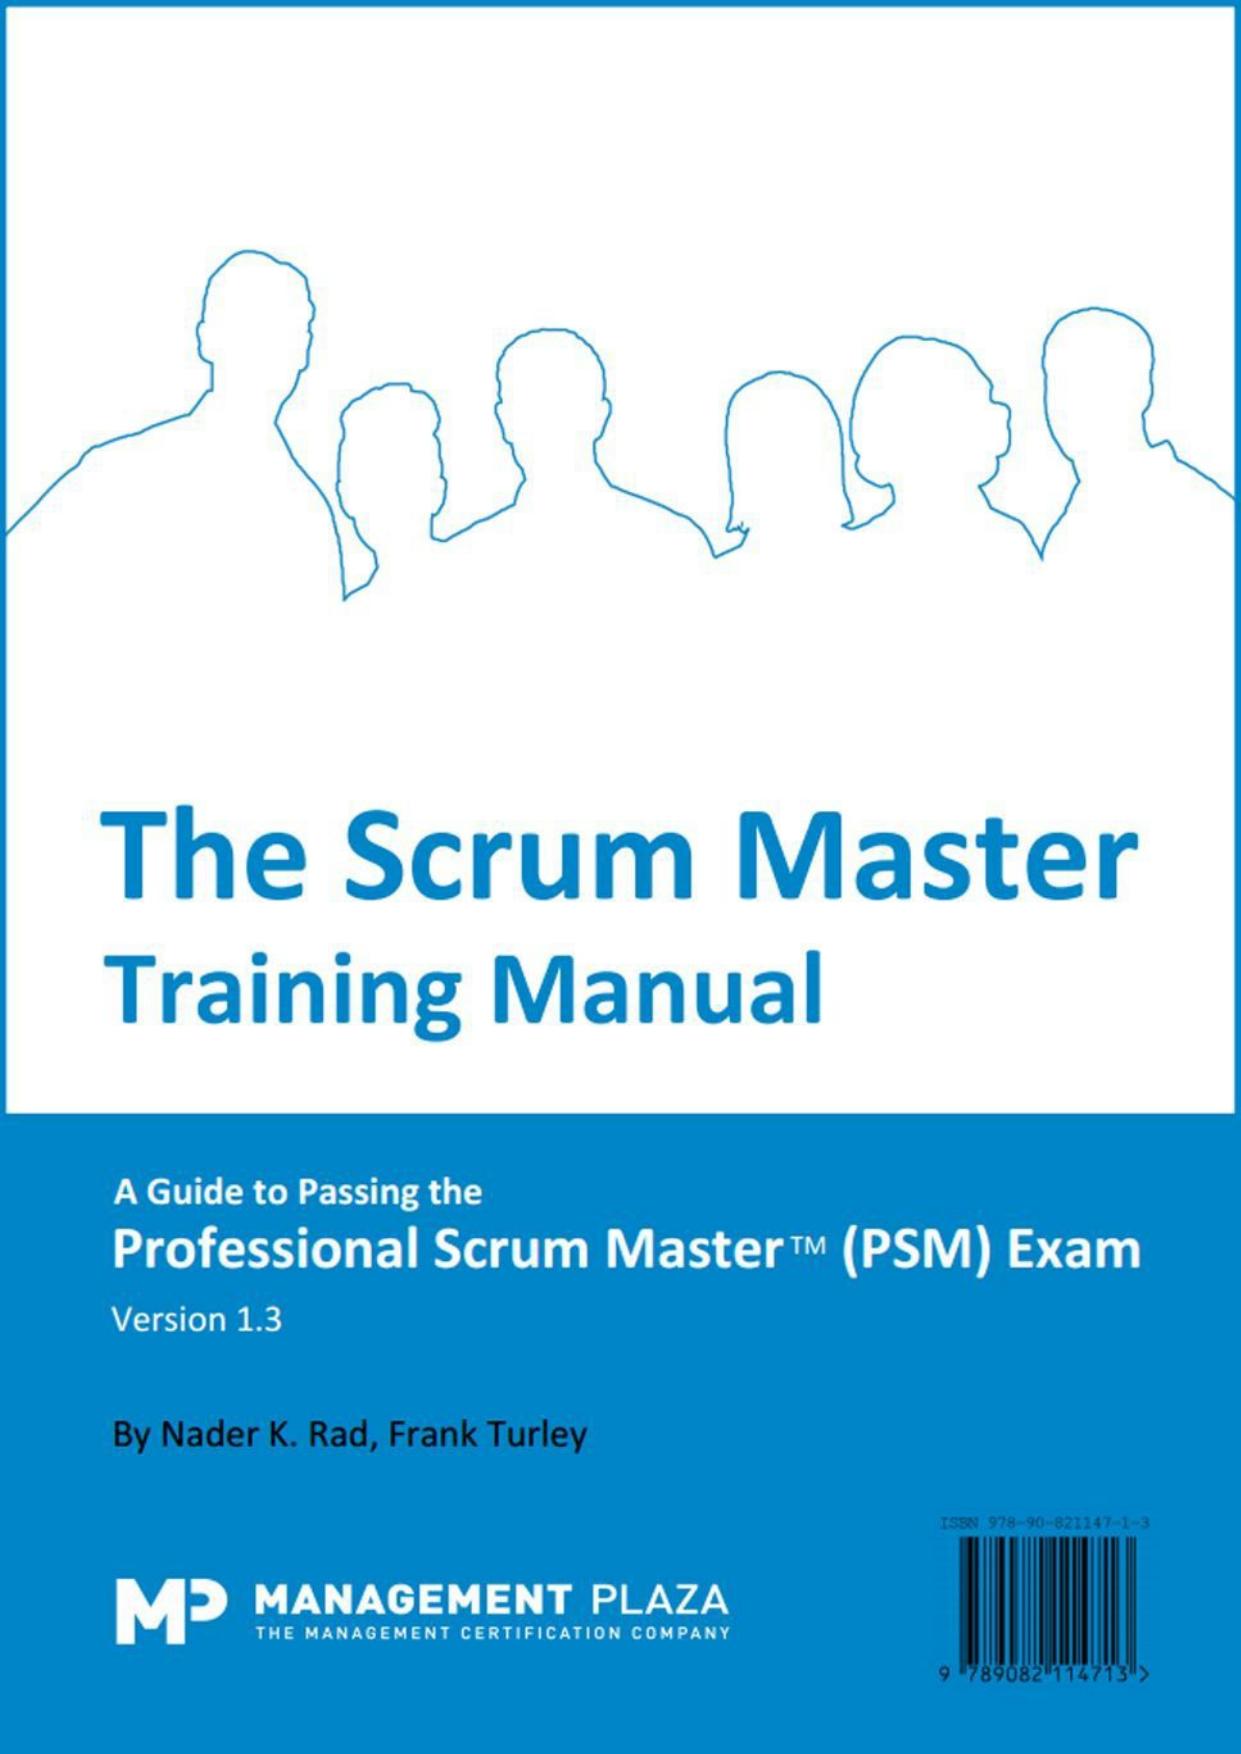 The Scrum Master Training Manual: A Guide to the Professional Scrum Master (PSM) Exam